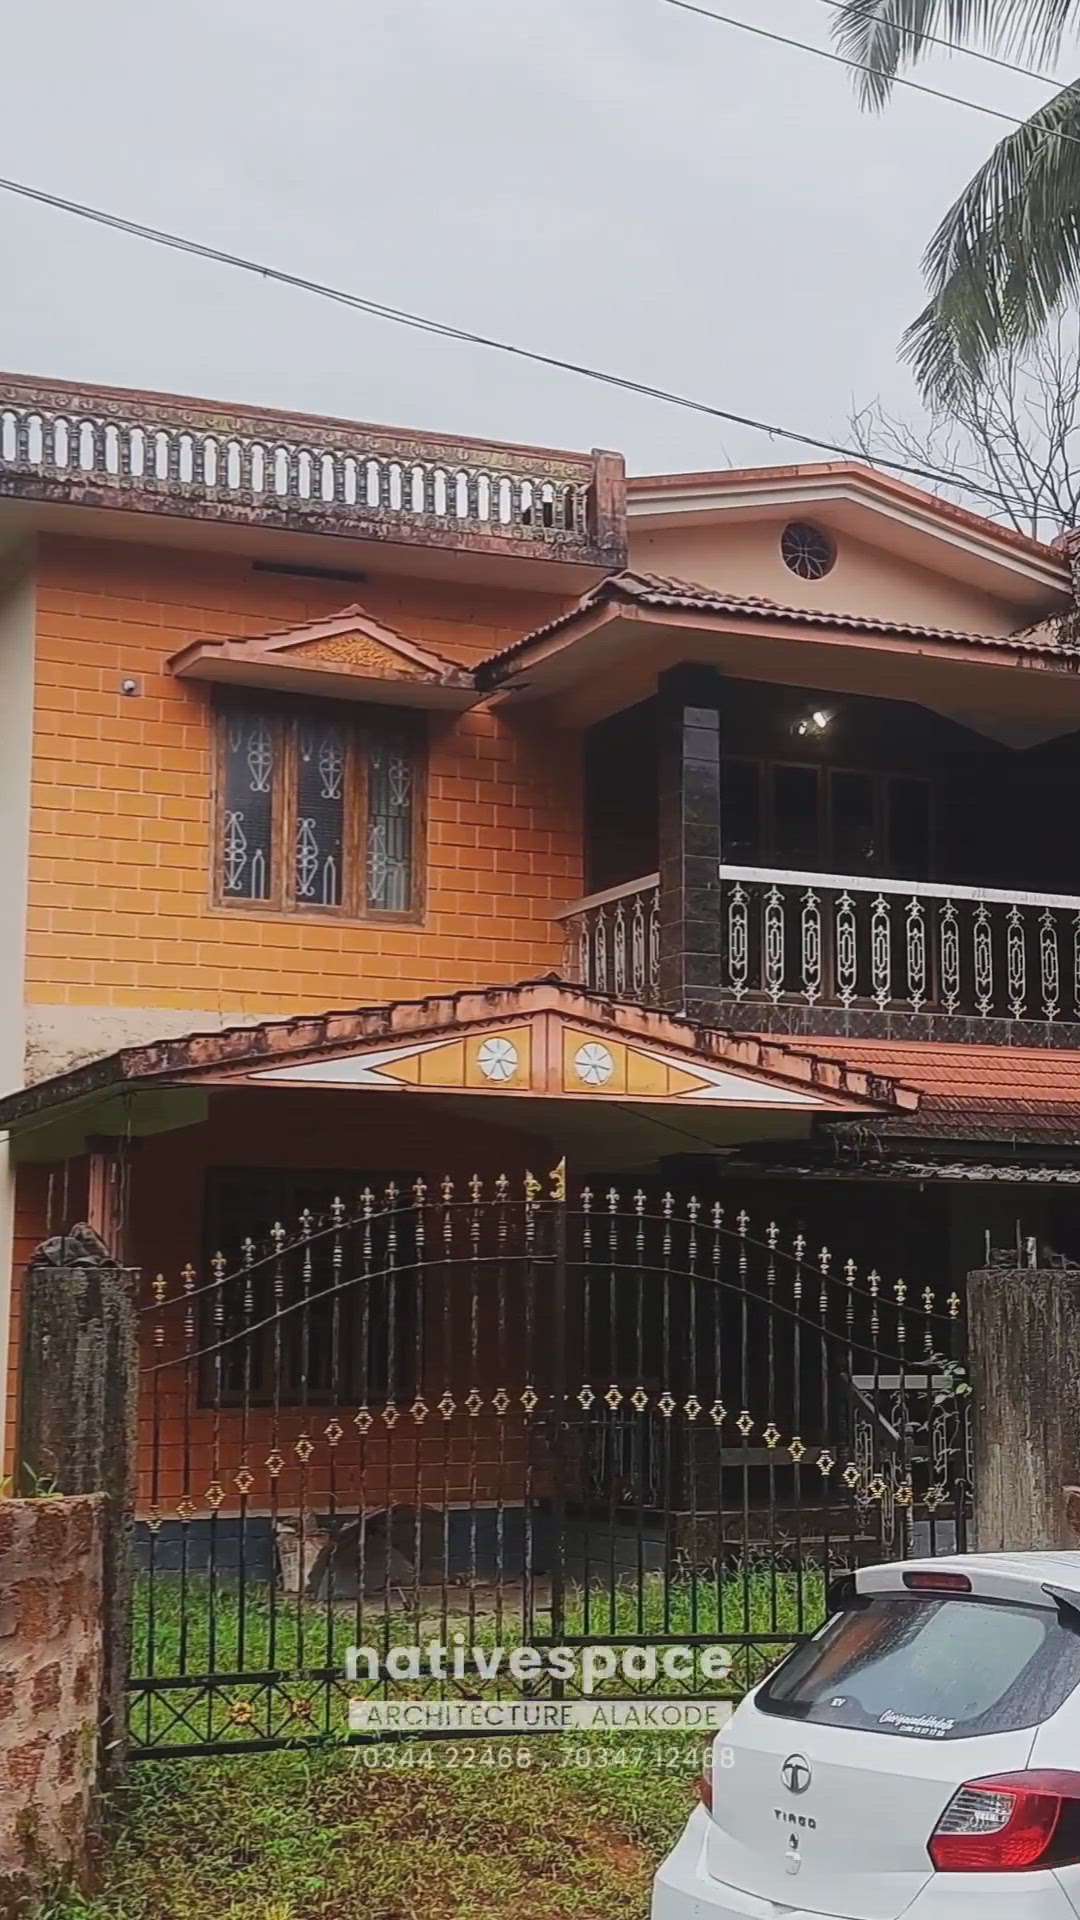 Completed Renovation project at Thadikkadavu, Kannur.
#koloapp #homerenovation #HouseRenovation #RenovationProject #keralahomesdesign #keralahome